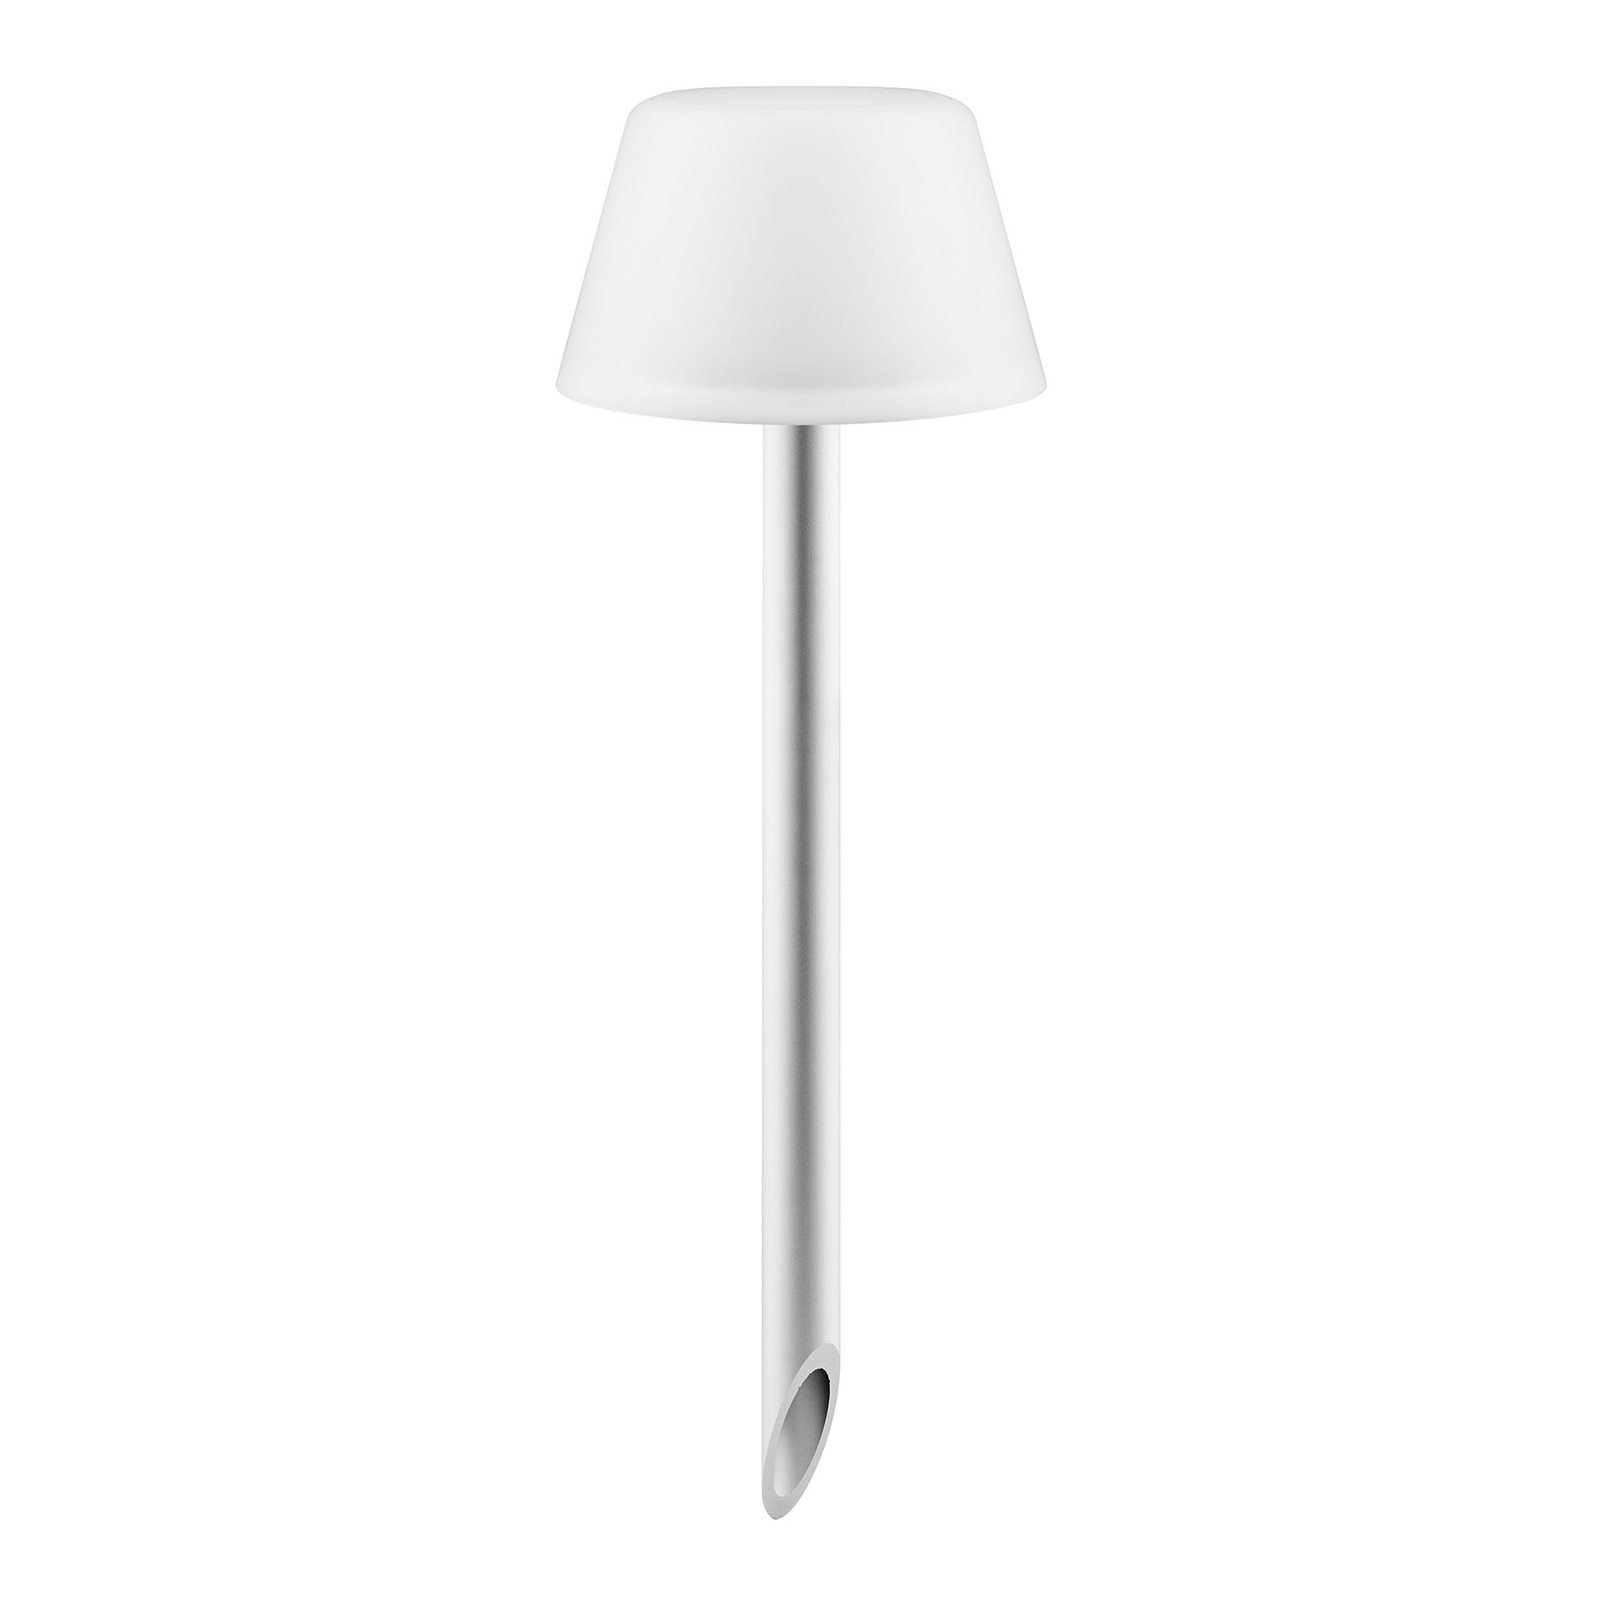 Eva Solo SunLight solar ground spike lamp, frosted